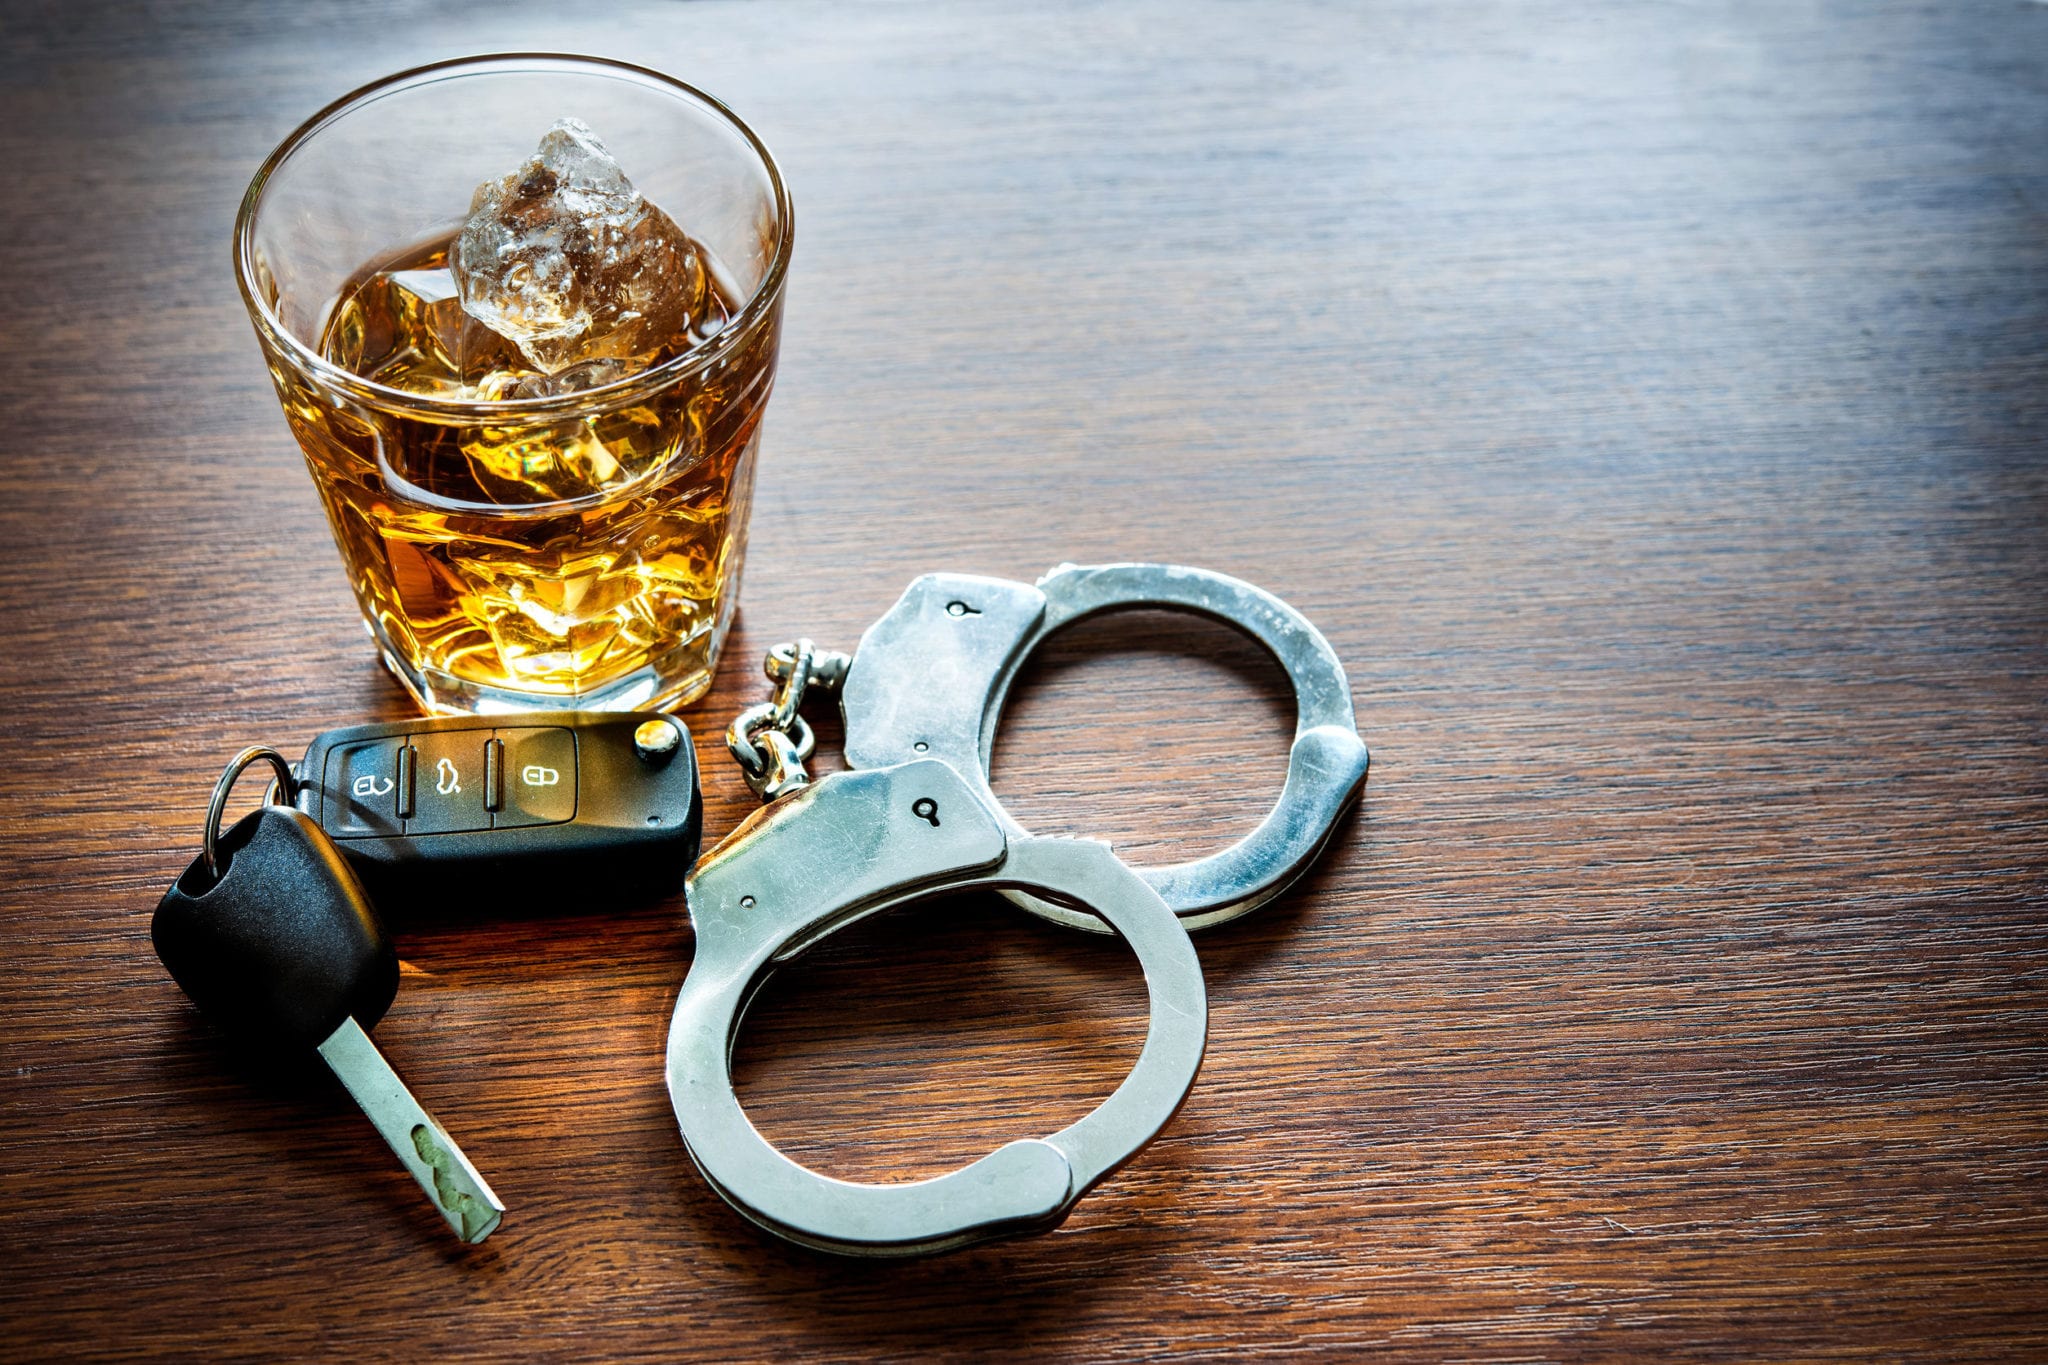 These Factors Can Impact Whether or Not Texans Get a DWI